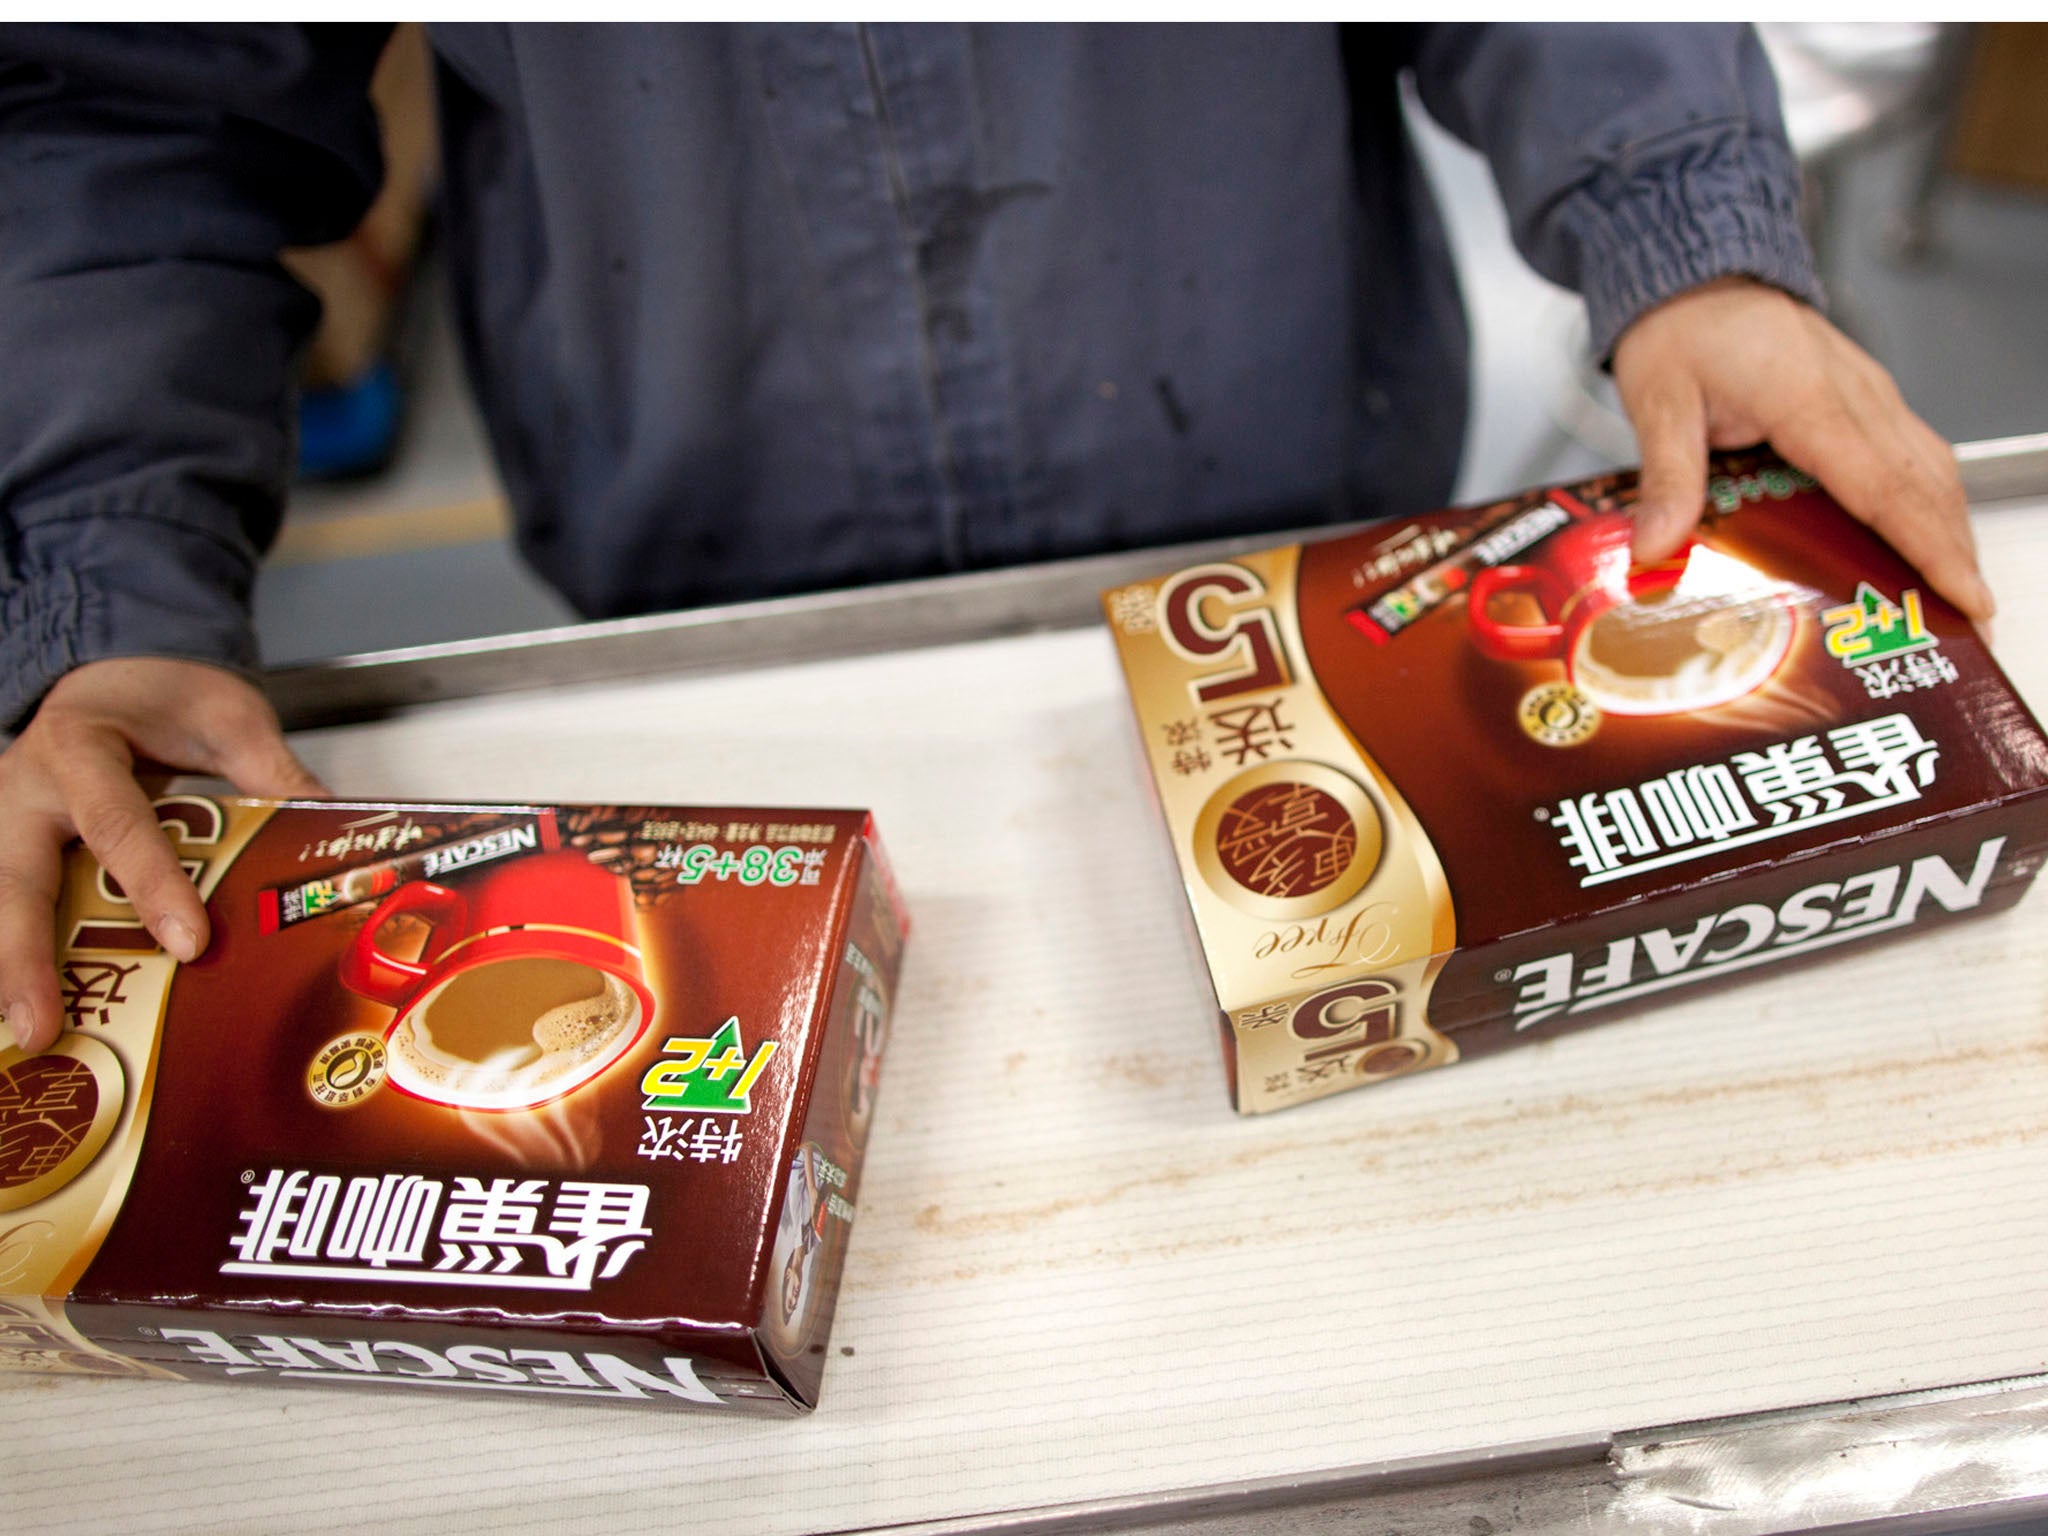 NESTLE CHINA: A worker packages Nescafe at Nestle's production facility in Dongguan, China. After peddling Nescafe and other products in China, the Swiss company is now asking Chinese consumers what they really want.